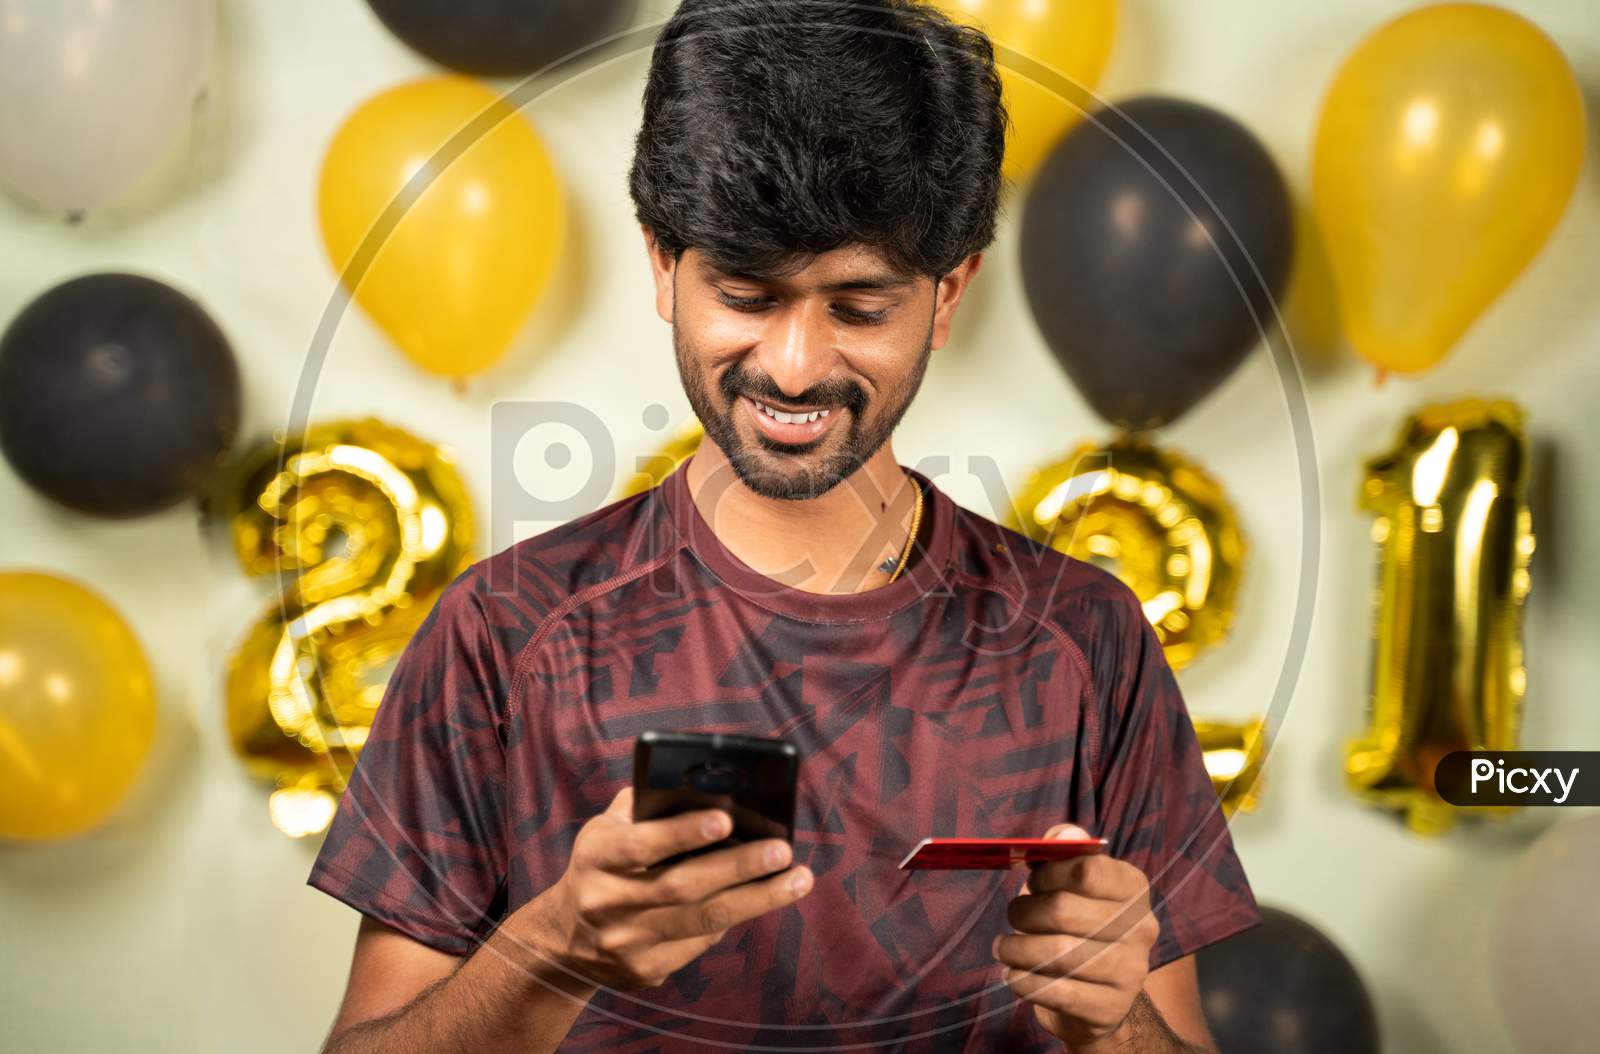 Young Man Busy In Purchasing Or Doing Online Payment On Mobile During Holiday Seasonal Sale On 2021 New Year Decorated Background - Concept Of Ecommerce, Technology, Internet For Shopping On Mobile.